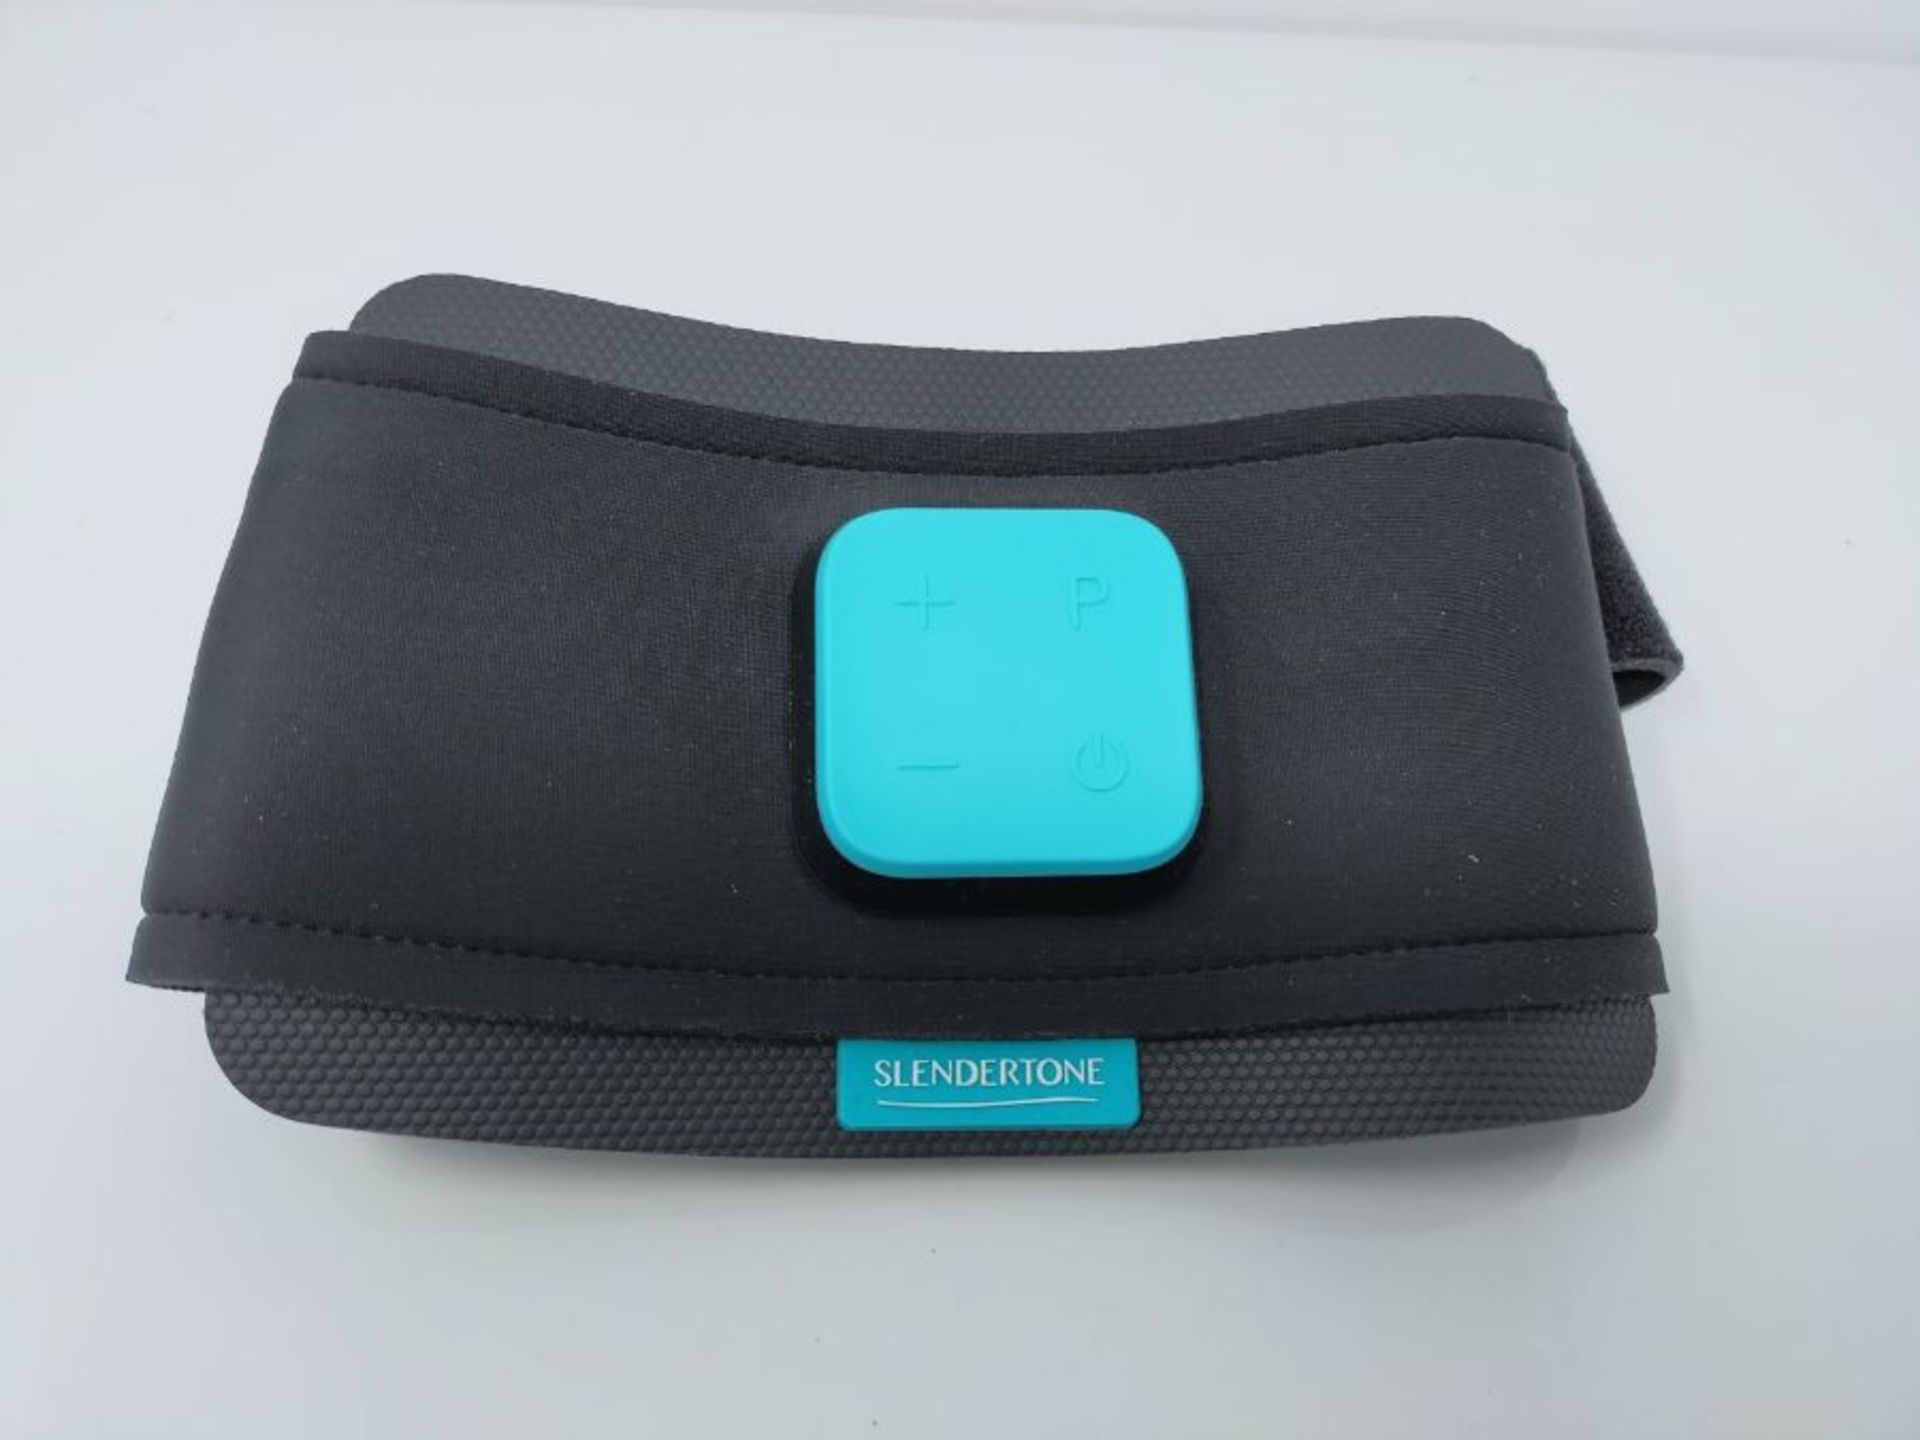 RRP £115.00 Slendertone Unisex's Abs8 Muscle Stimulation Belt, Black, 24 to 42 inches - Image 2 of 3